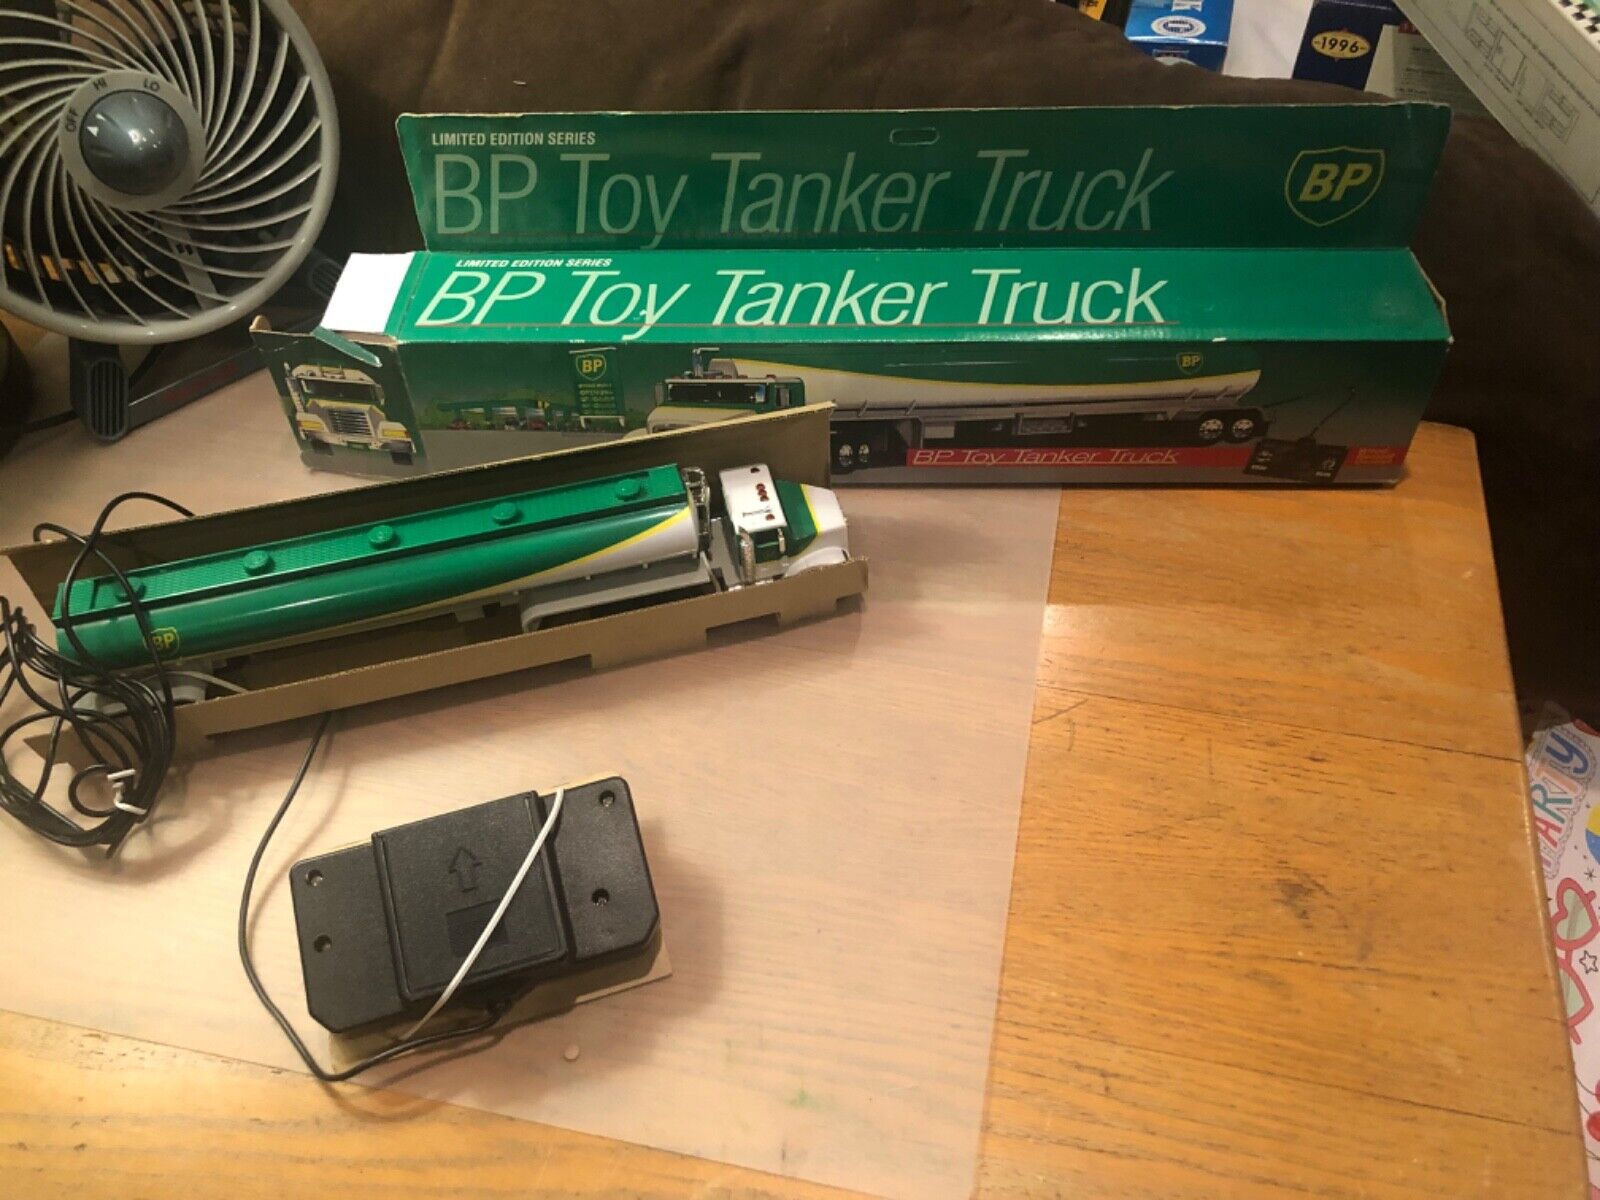 1992 BP TOY TANKER TRUCK WITH WIRED REMOTE LIMITED EDITION SERIES